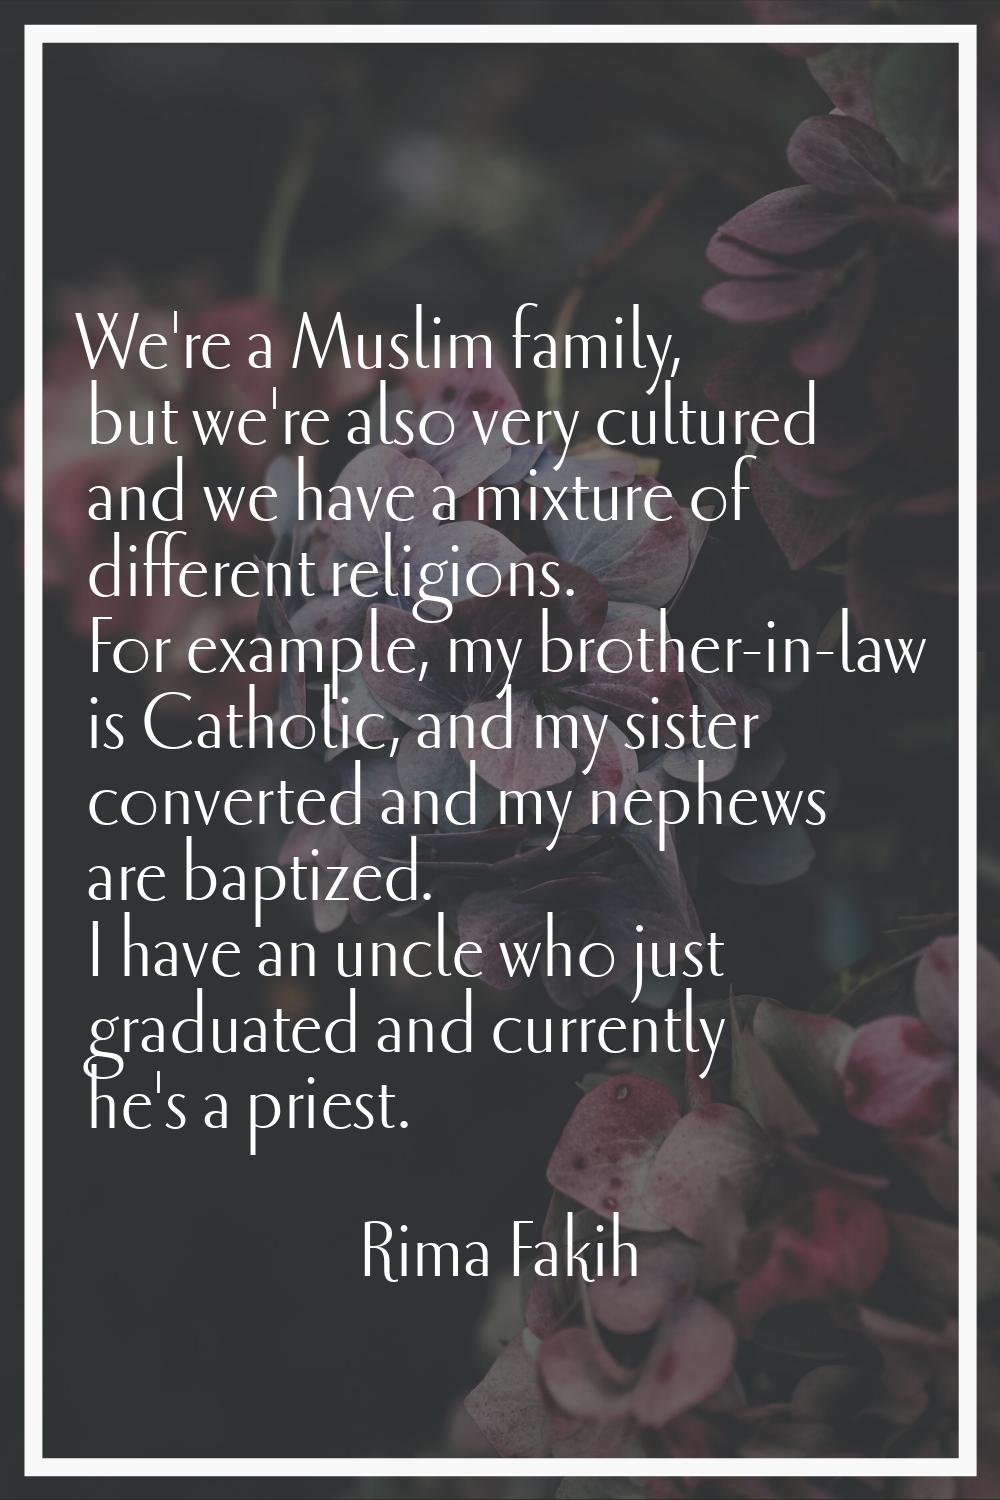 We're a Muslim family, but we're also very cultured and we have a mixture of different religions. F